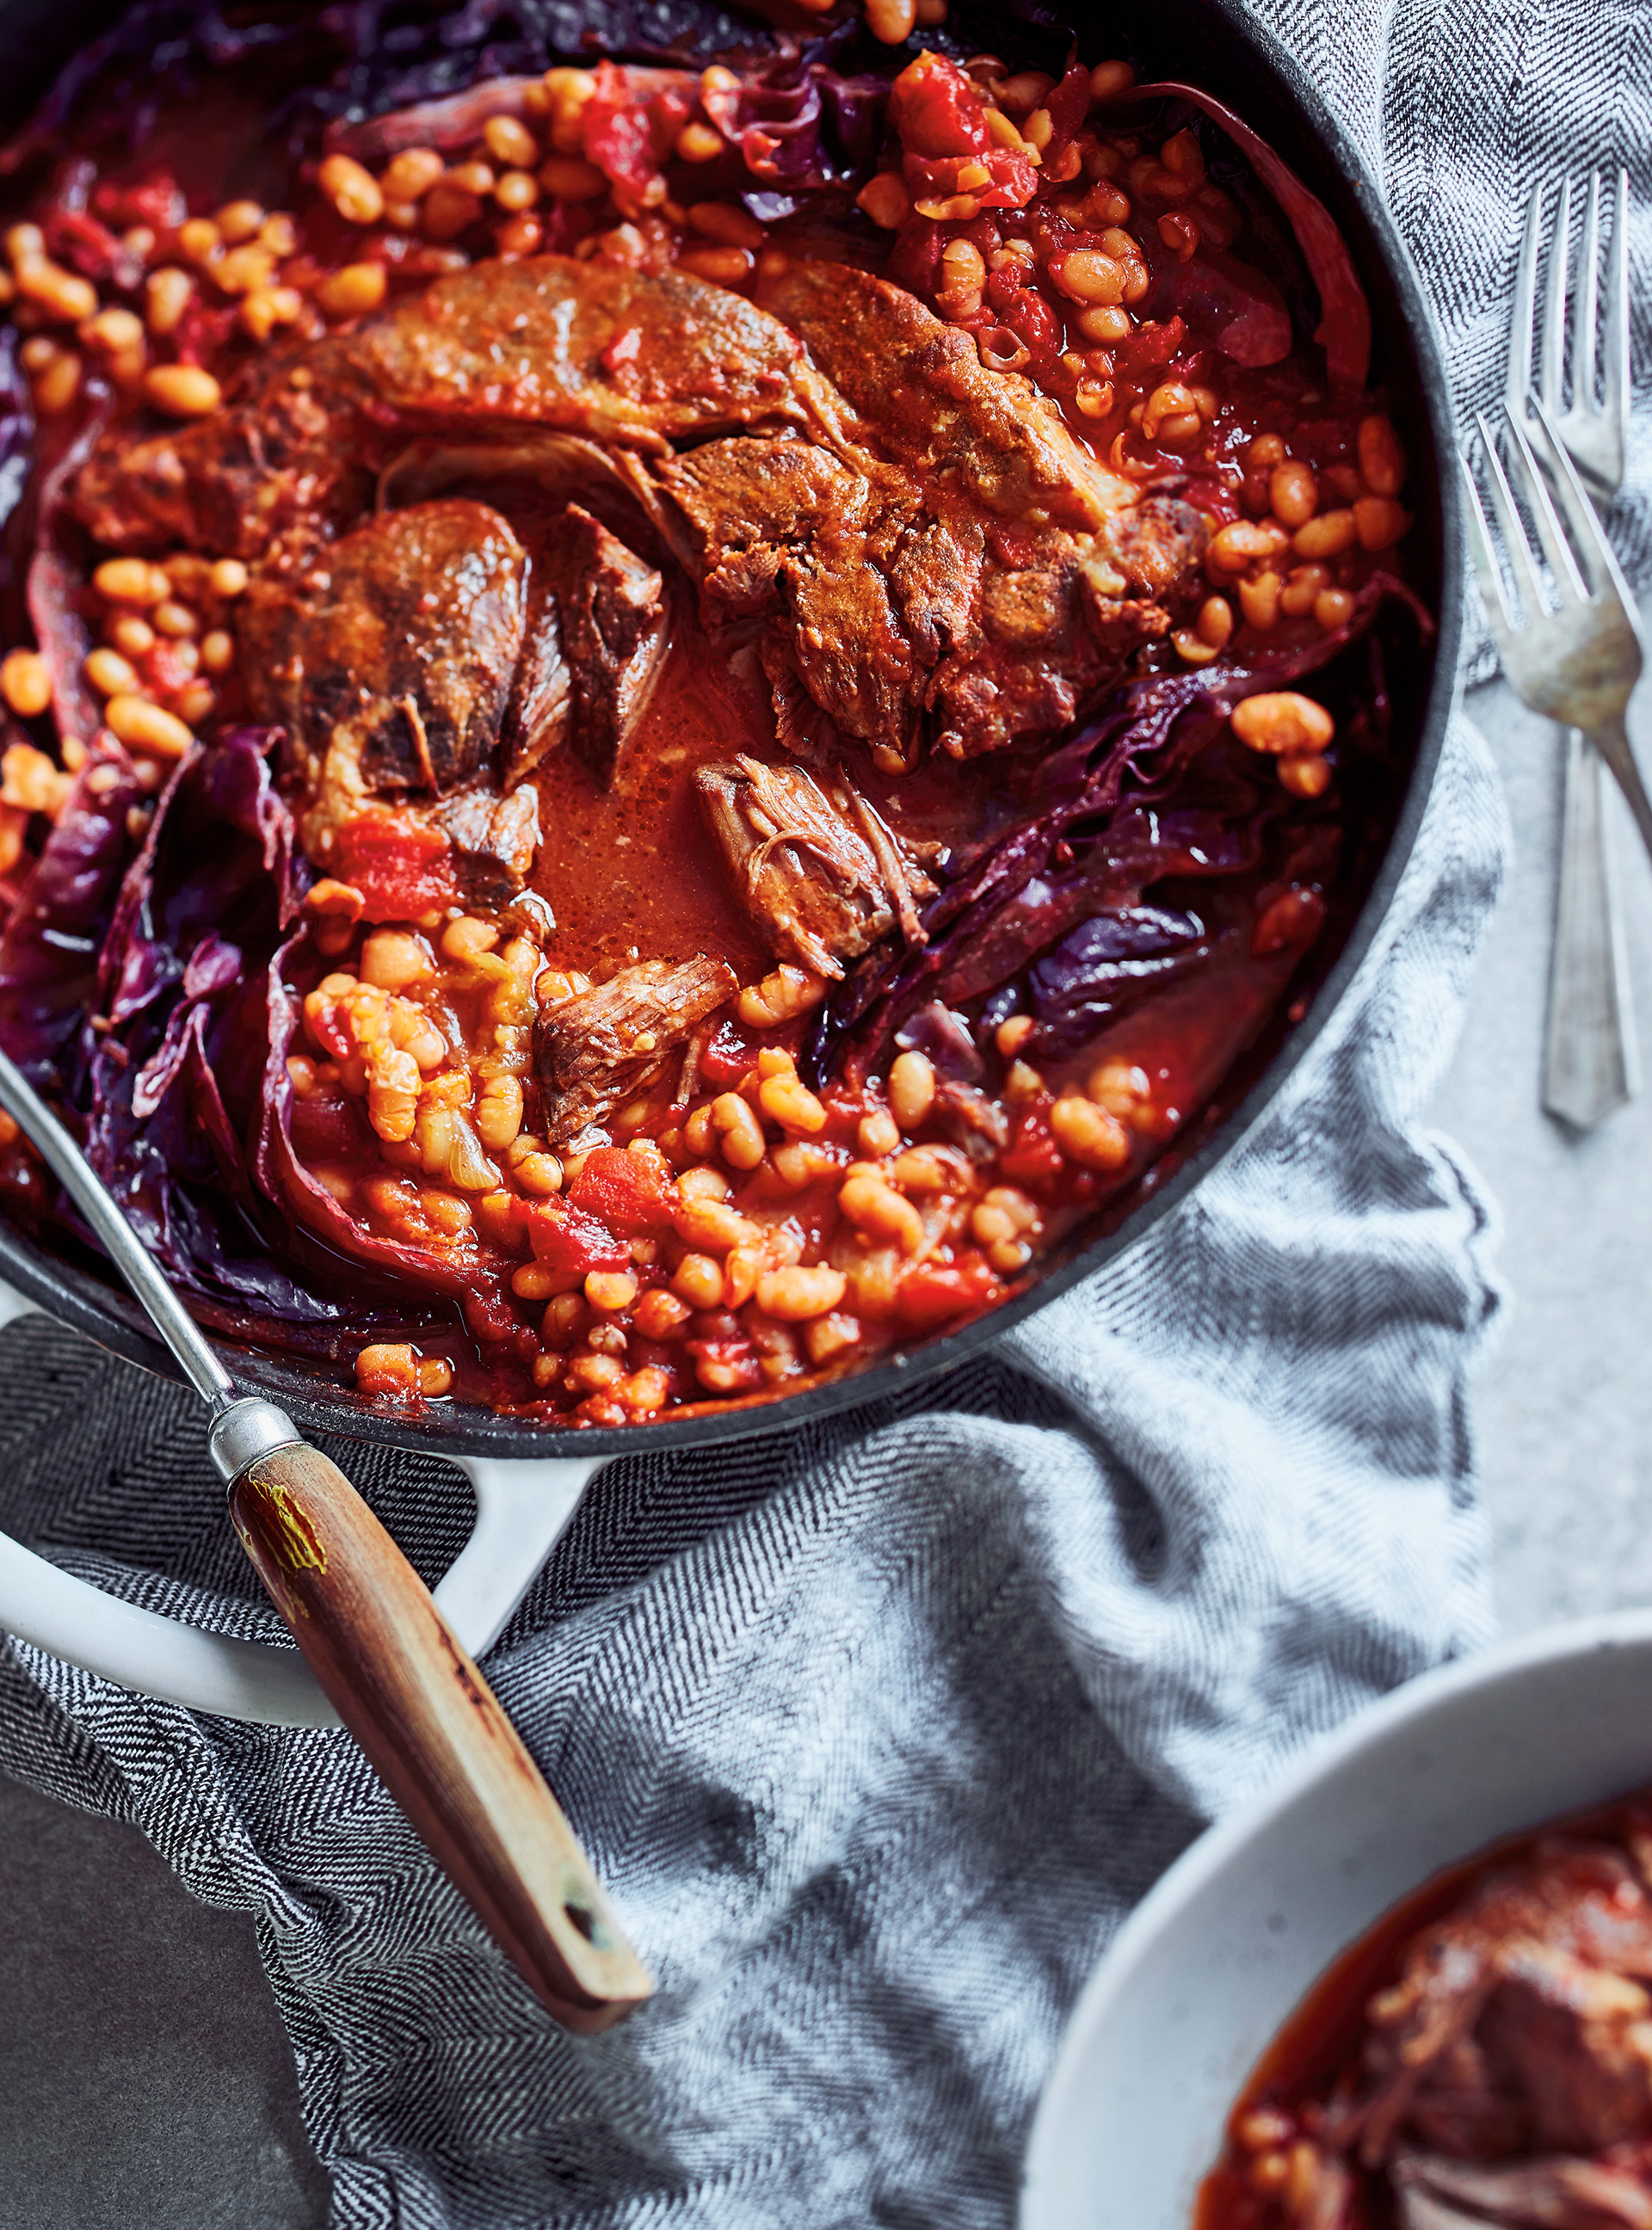 Braised Beef with White Beans and Red Cabbage